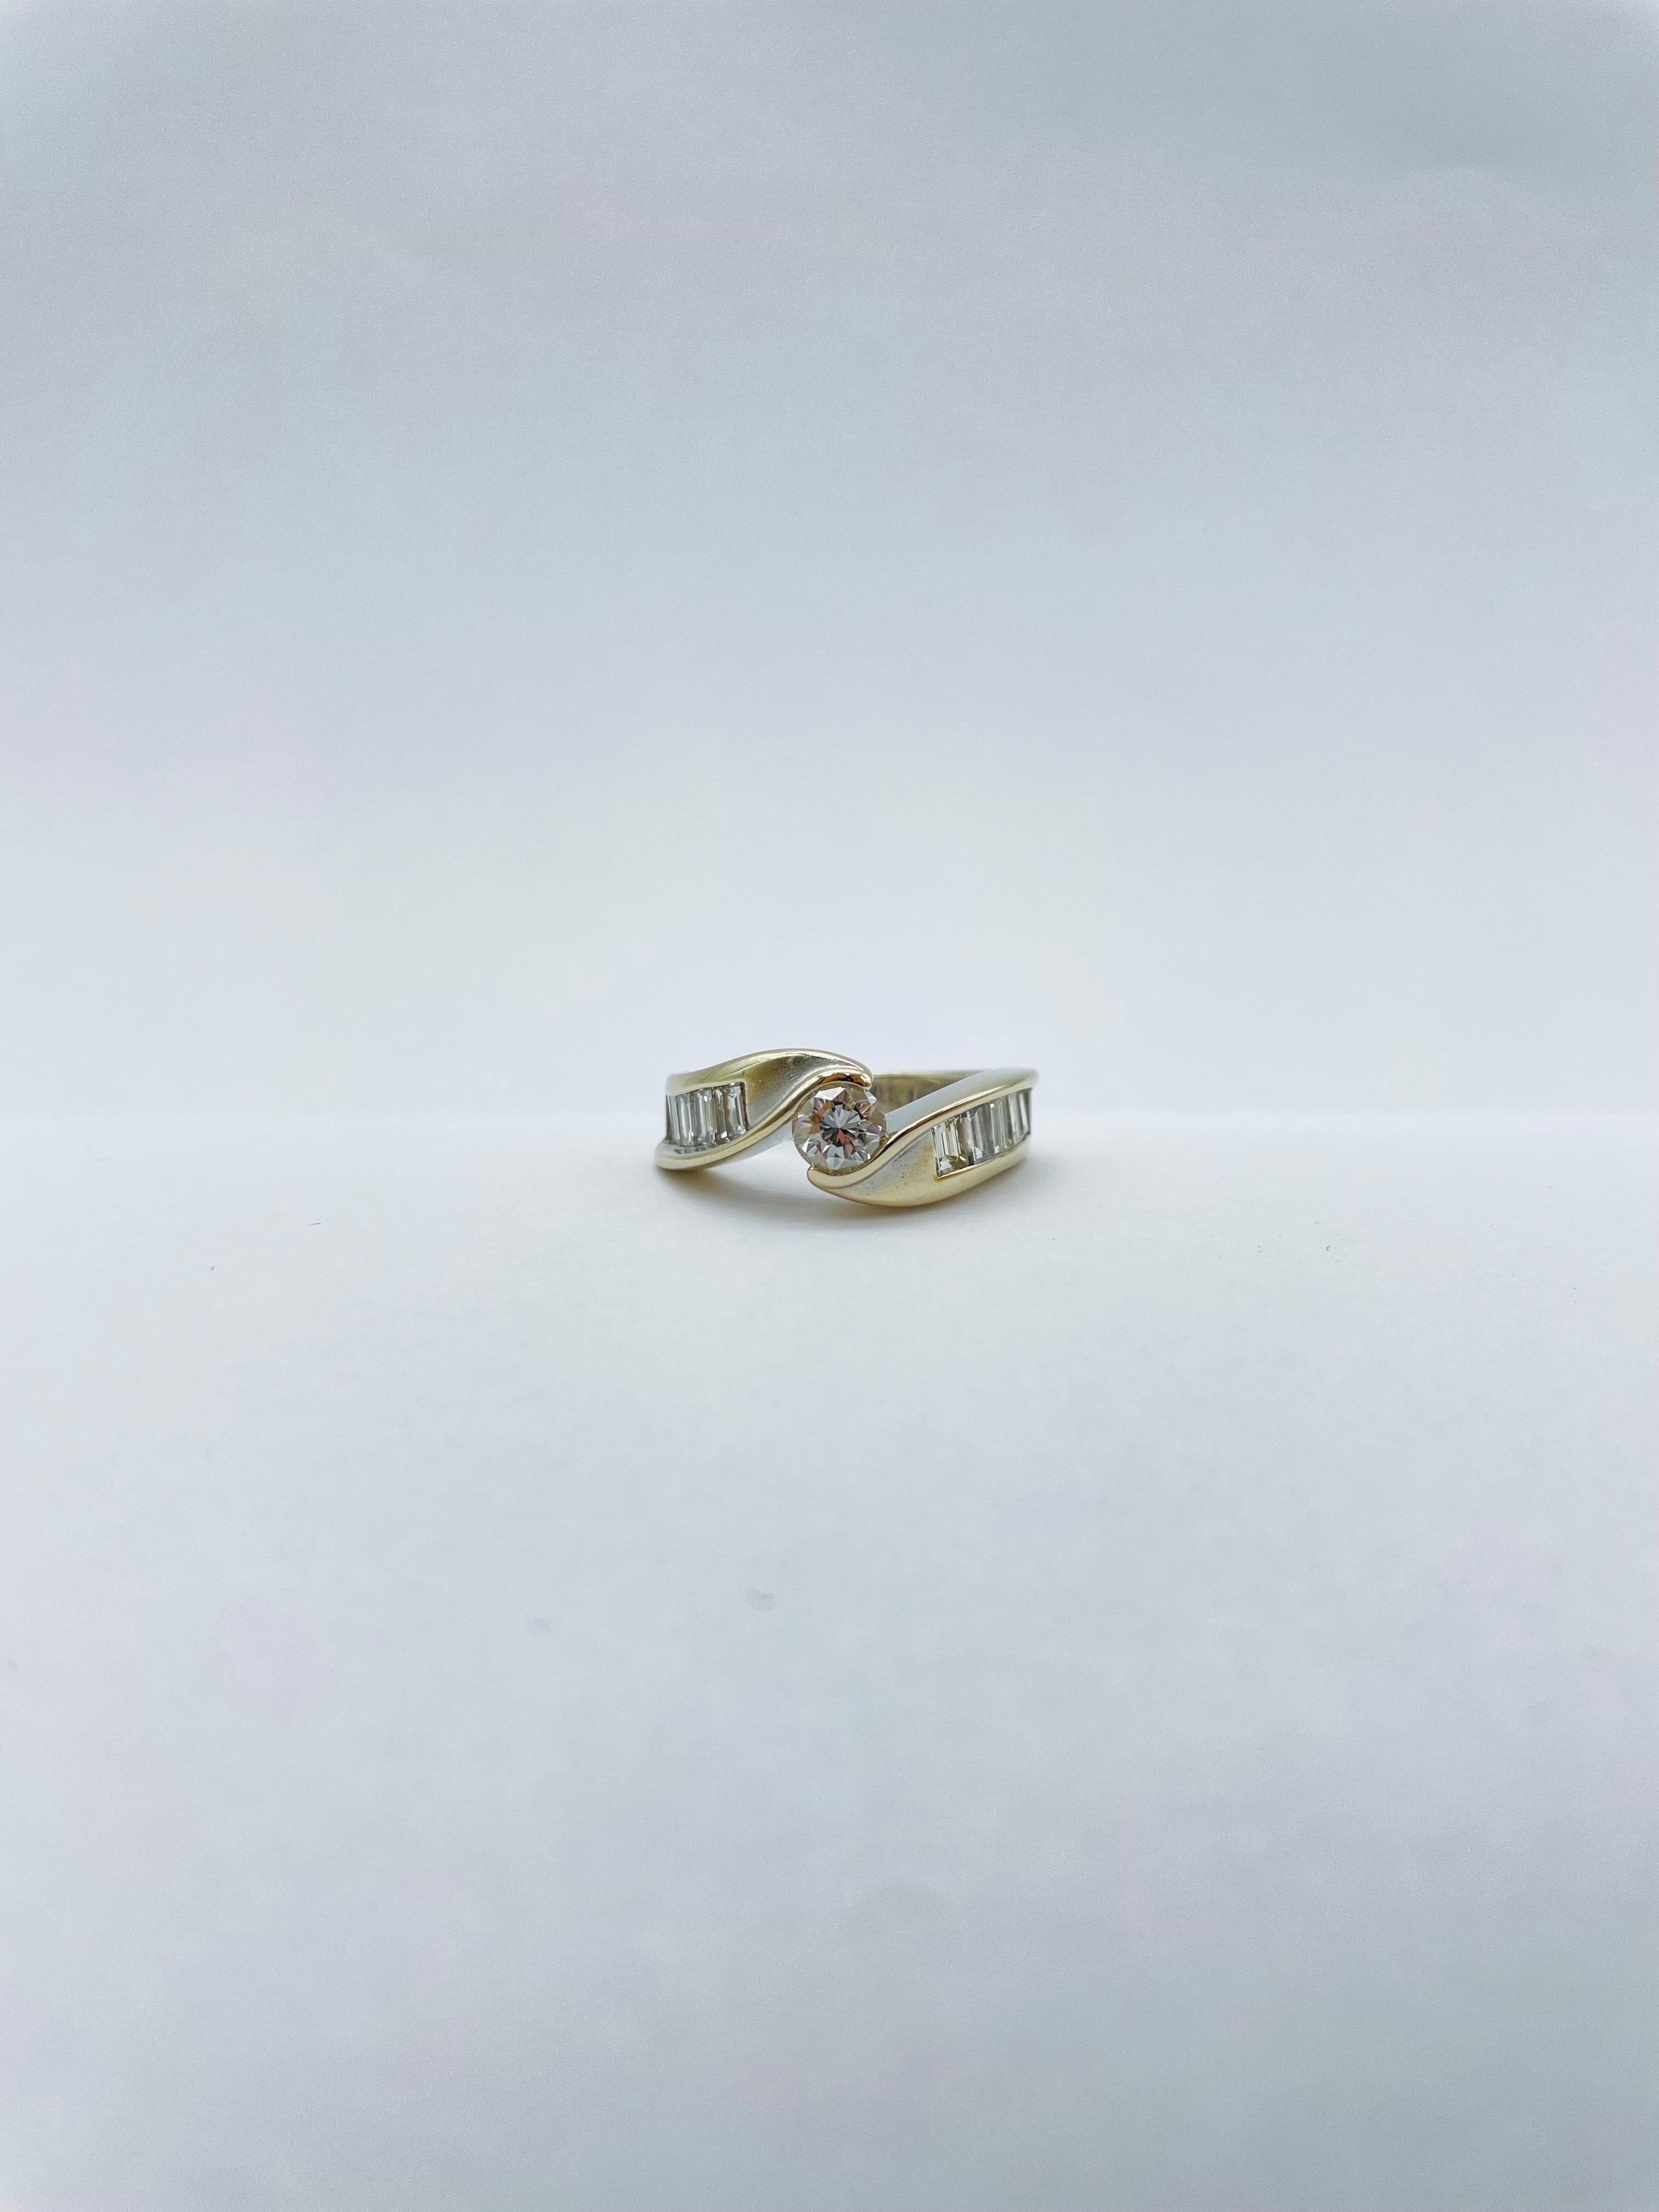 Unique 18k gold ring, 0.50 ct. diamond and 8 baguette, White/Yellow Gold.

Mounted clamping ring. Central diamond approx. 0.50 carat. In addition, each flanked with 5 baguette stones (total 1.5 carats). Bicolor ring band made of 18k solid